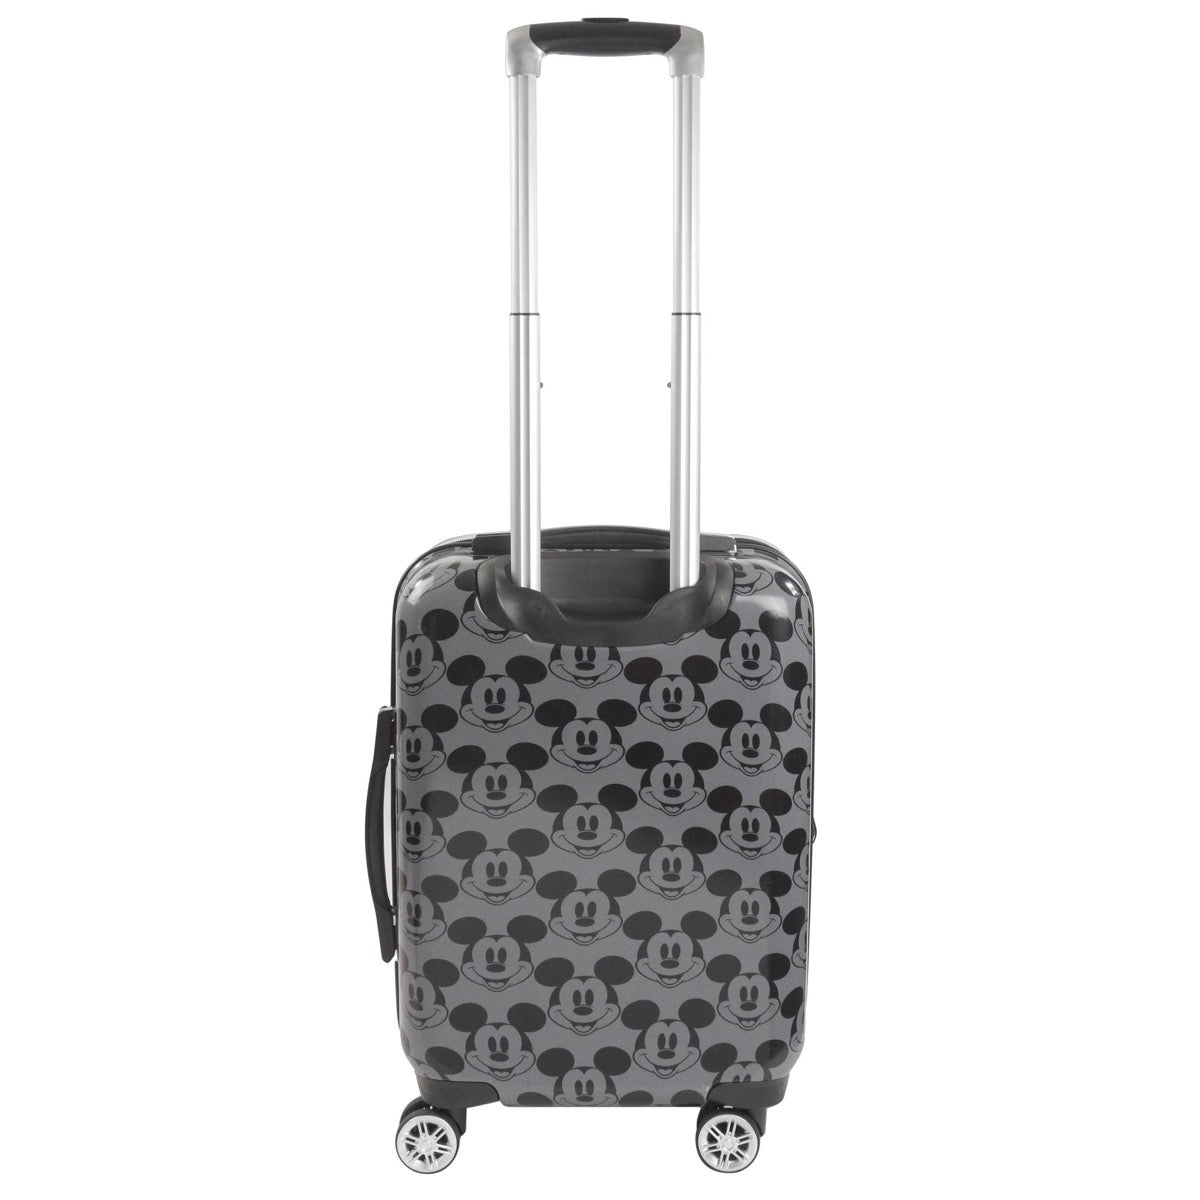 Disney Mickey Mouse printed 21" carry-on expandable spinner hard-sided suitcase luggage charcoal grey and black